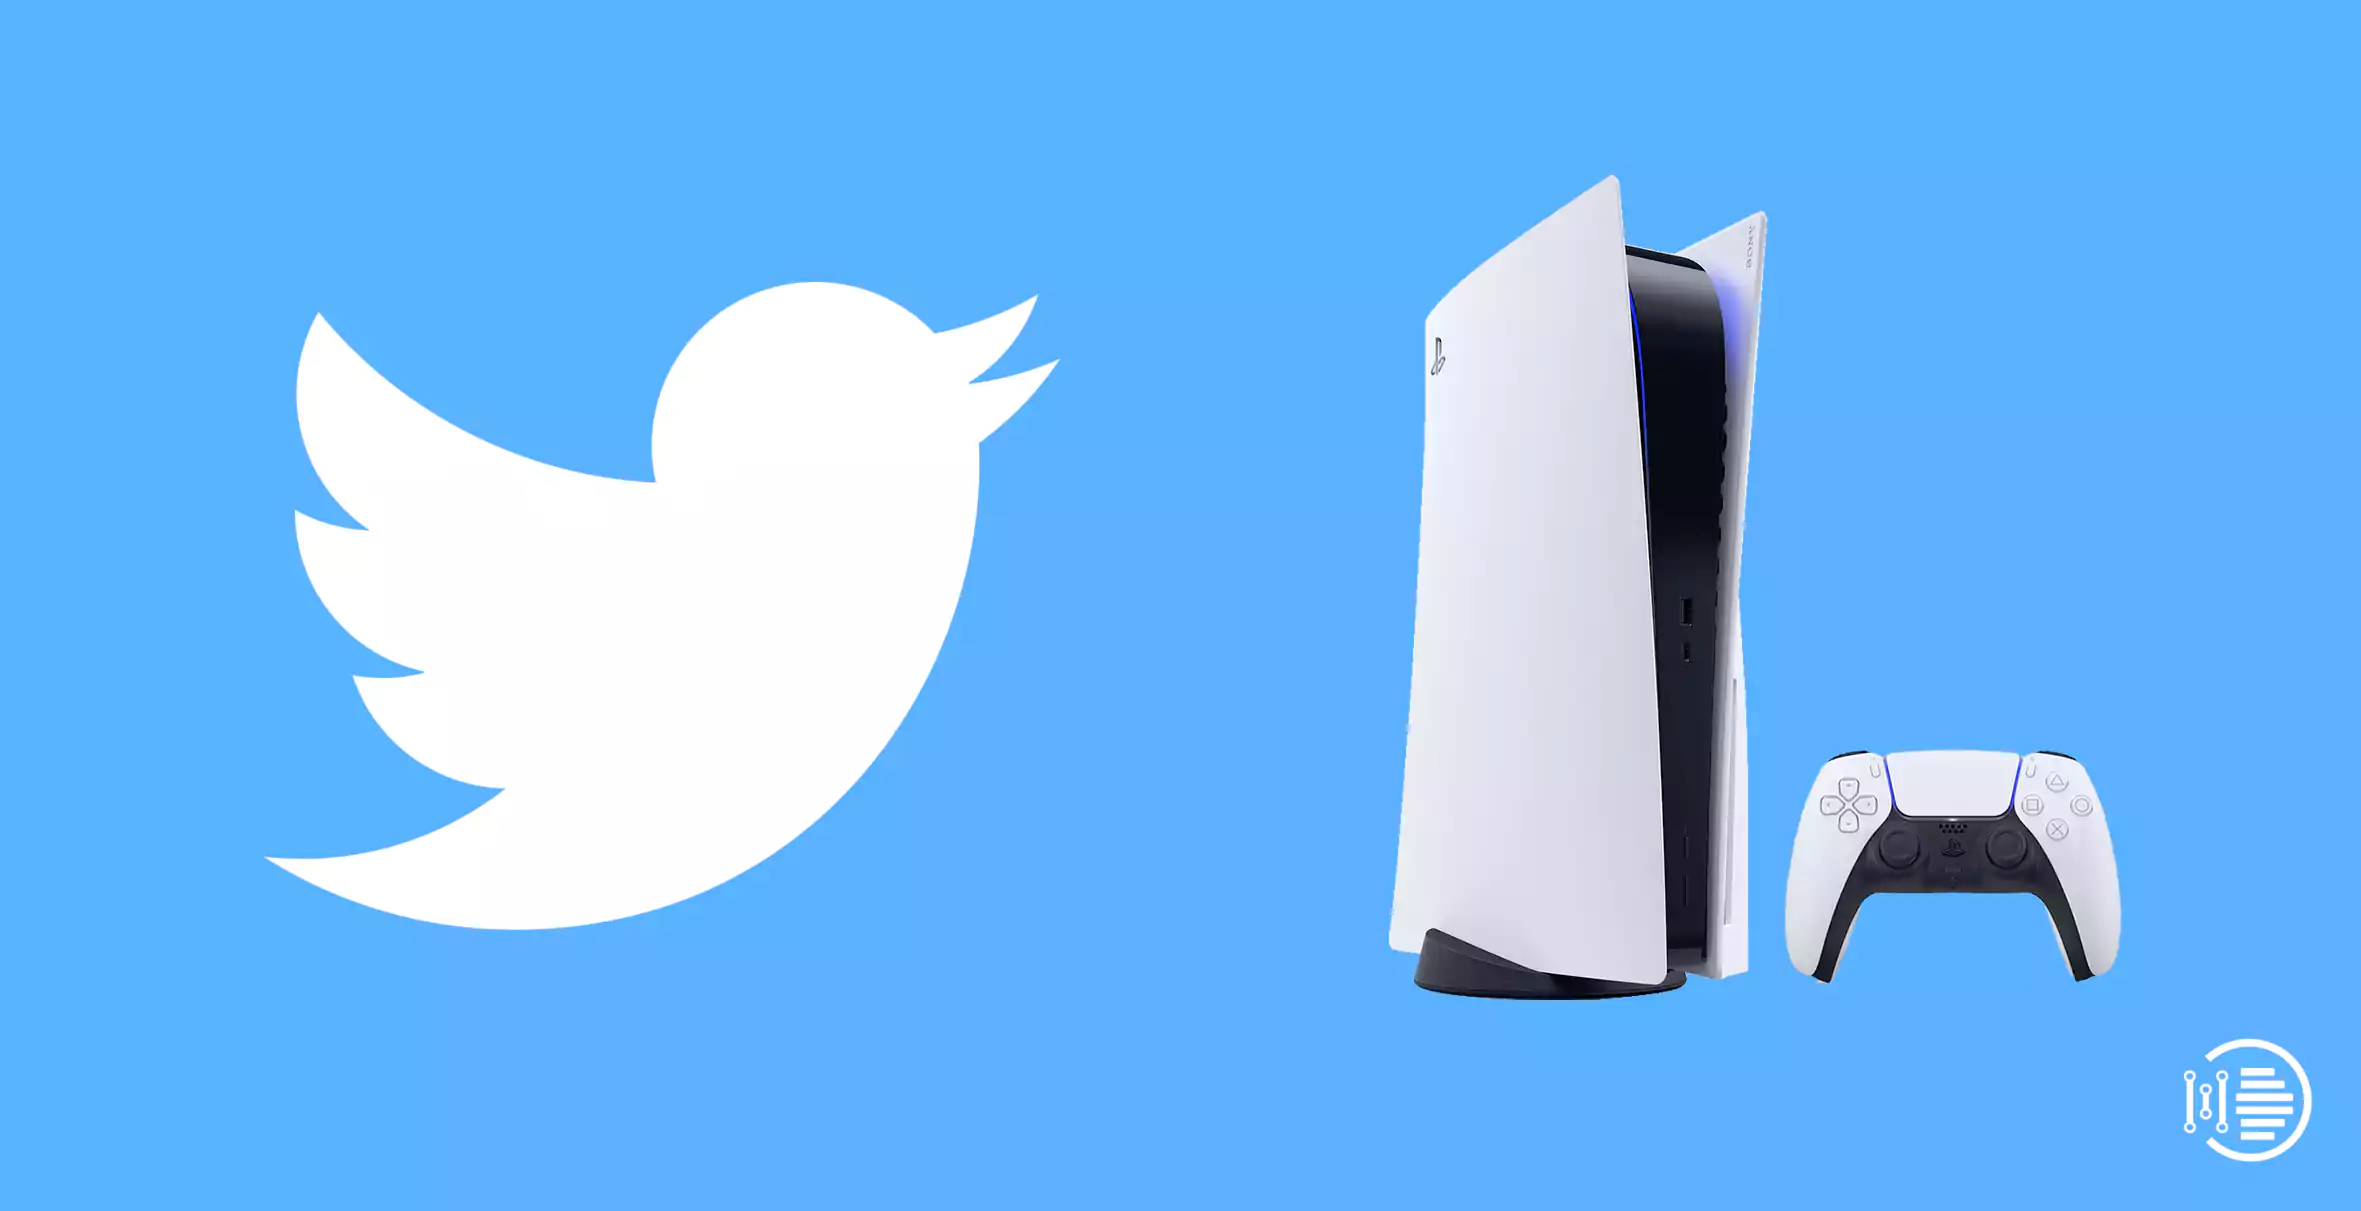 Best way to get Twitter On PlayStation 5